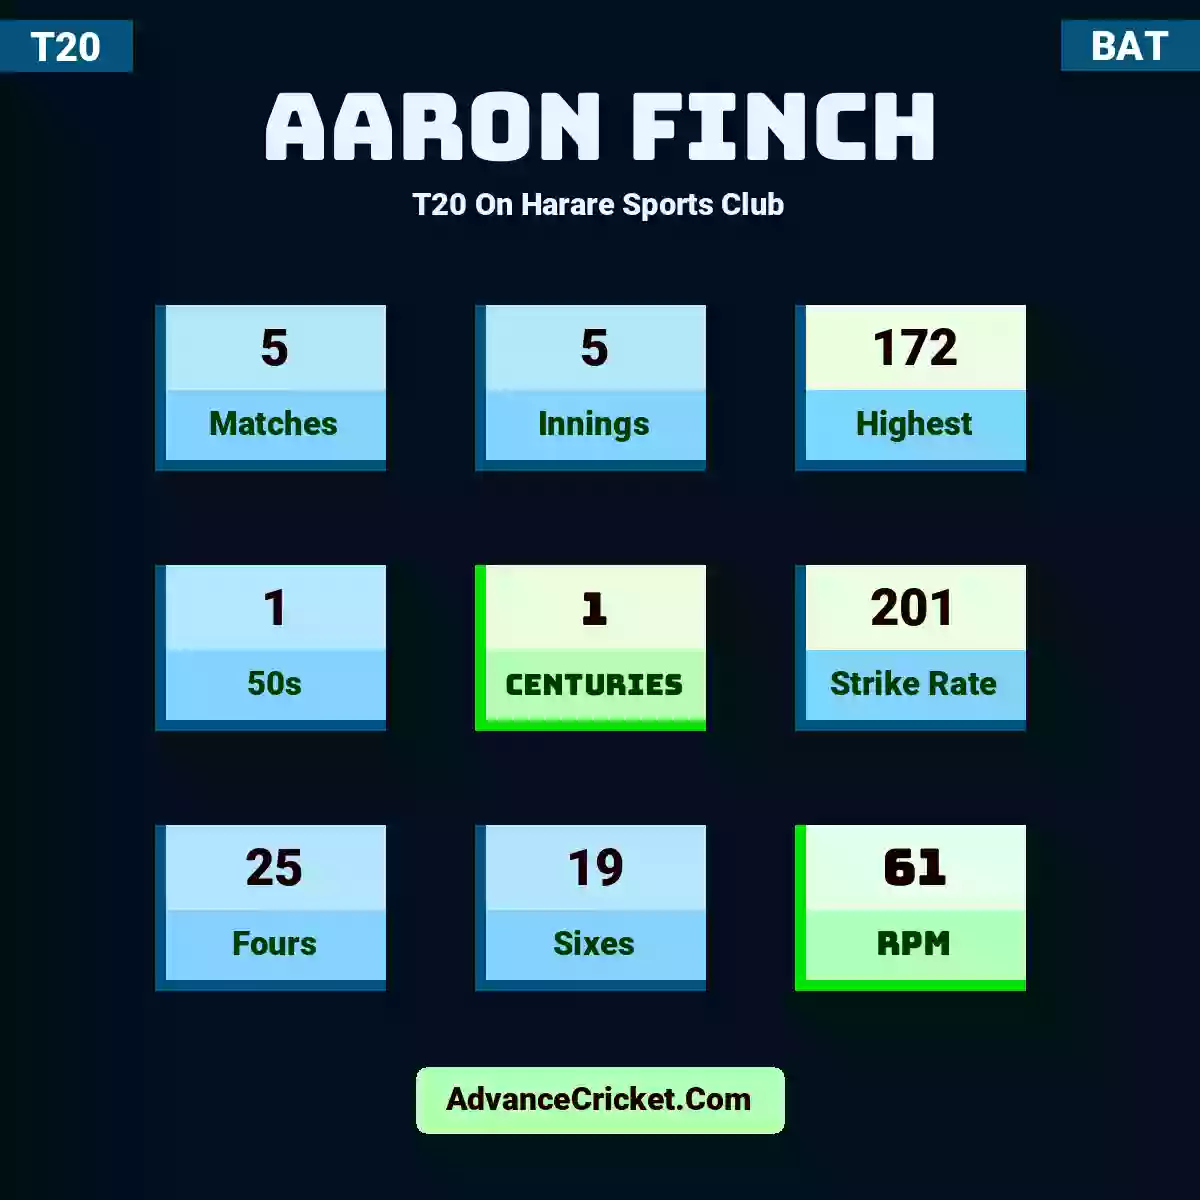 Aaron Finch T20  On Harare Sports Club, Aaron Finch played 5 matches, scored 172 runs as highest, 1 half-centuries, and 1 centuries, with a strike rate of 201. A.Finch hit 25 fours and 19 sixes, with an RPM of 61.